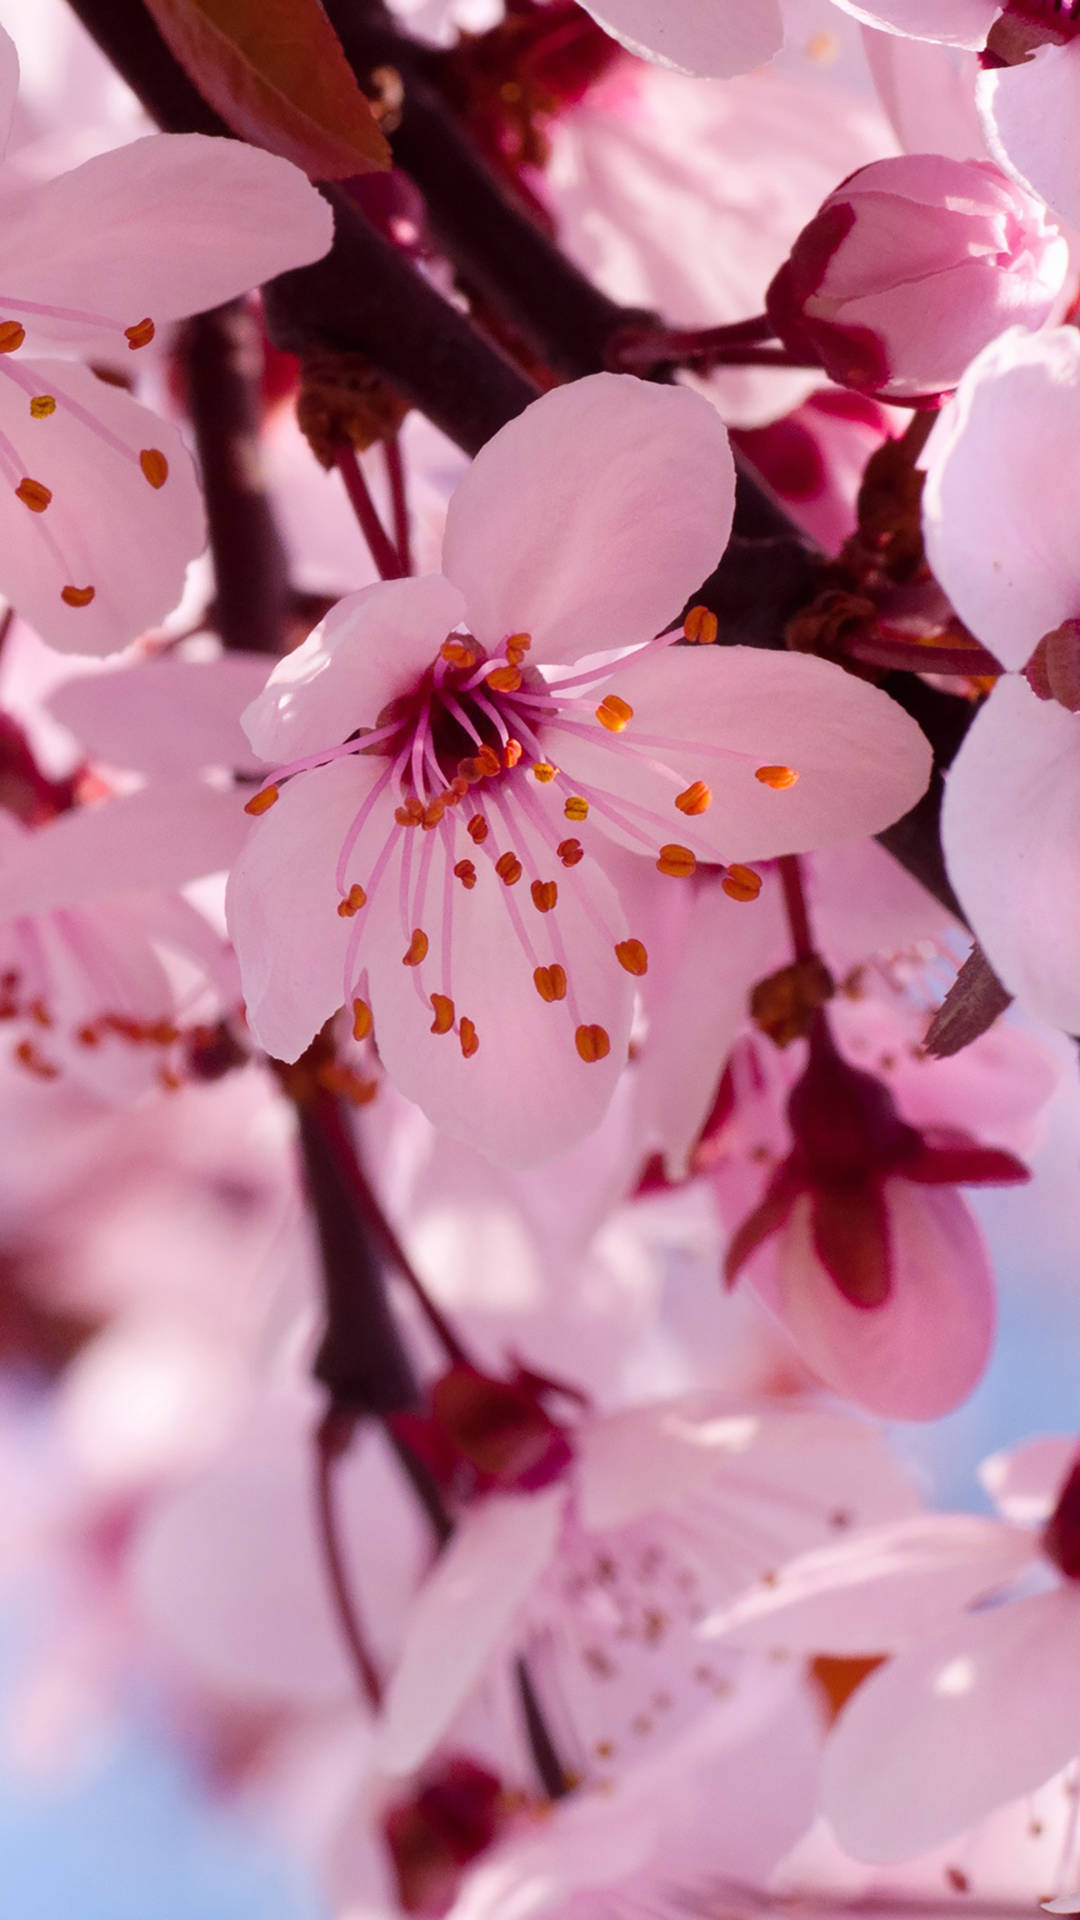 Adorn Your Phone Screen with the Beauty of Spring Wallpaper